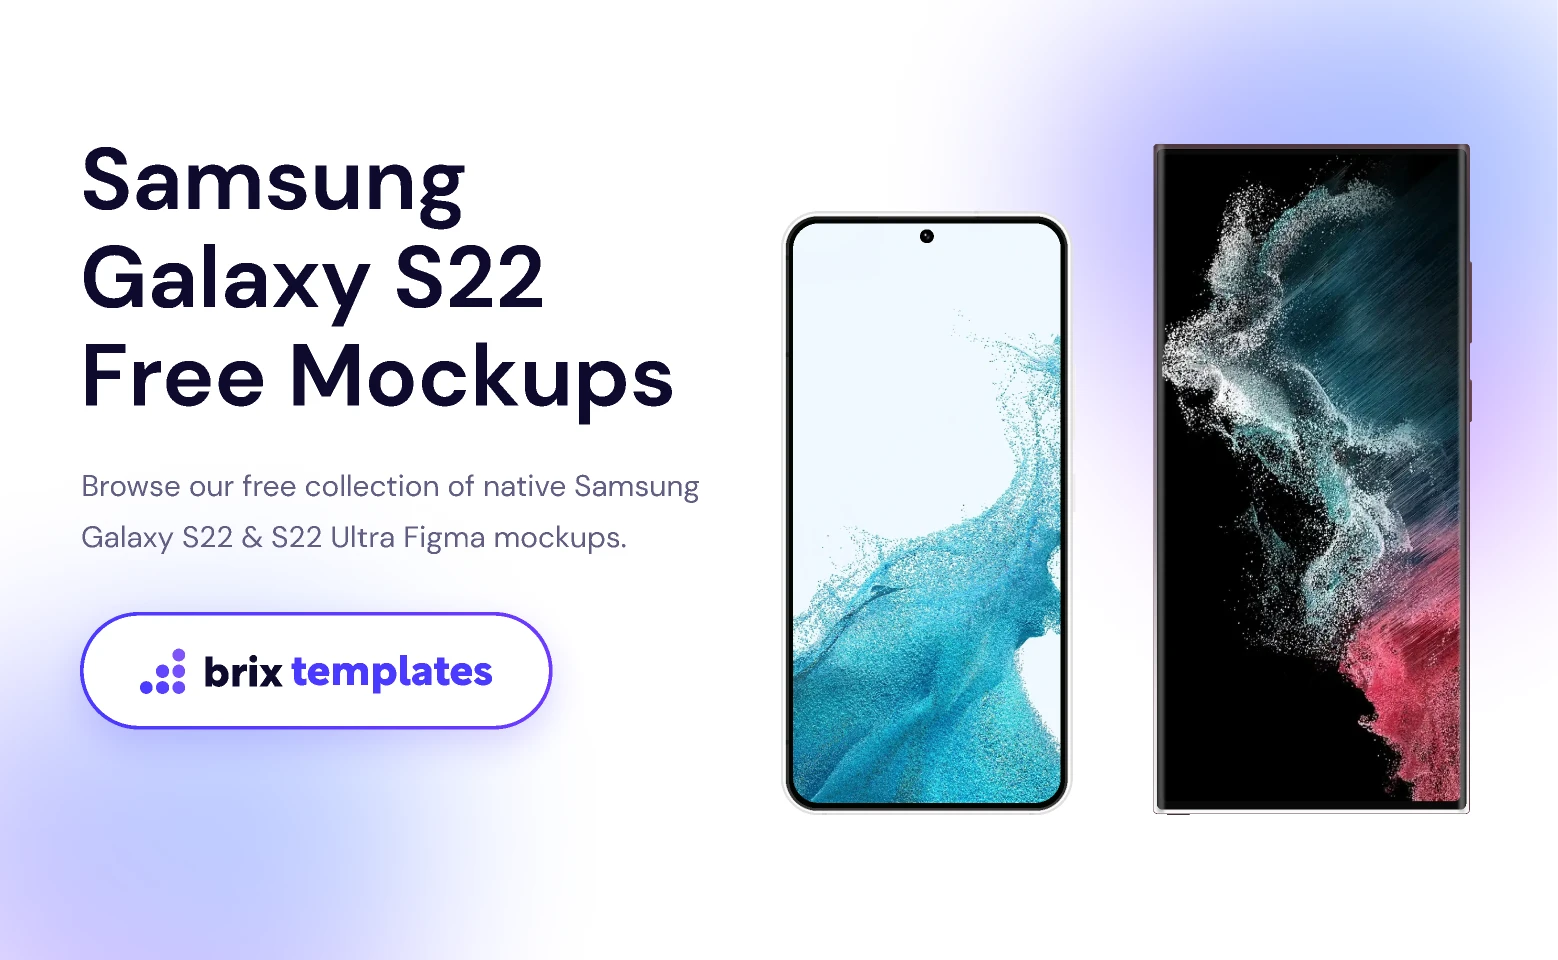 Samsung Galaxy S22 Free Mockups | BRIX Templates for Figma and Adobe XD